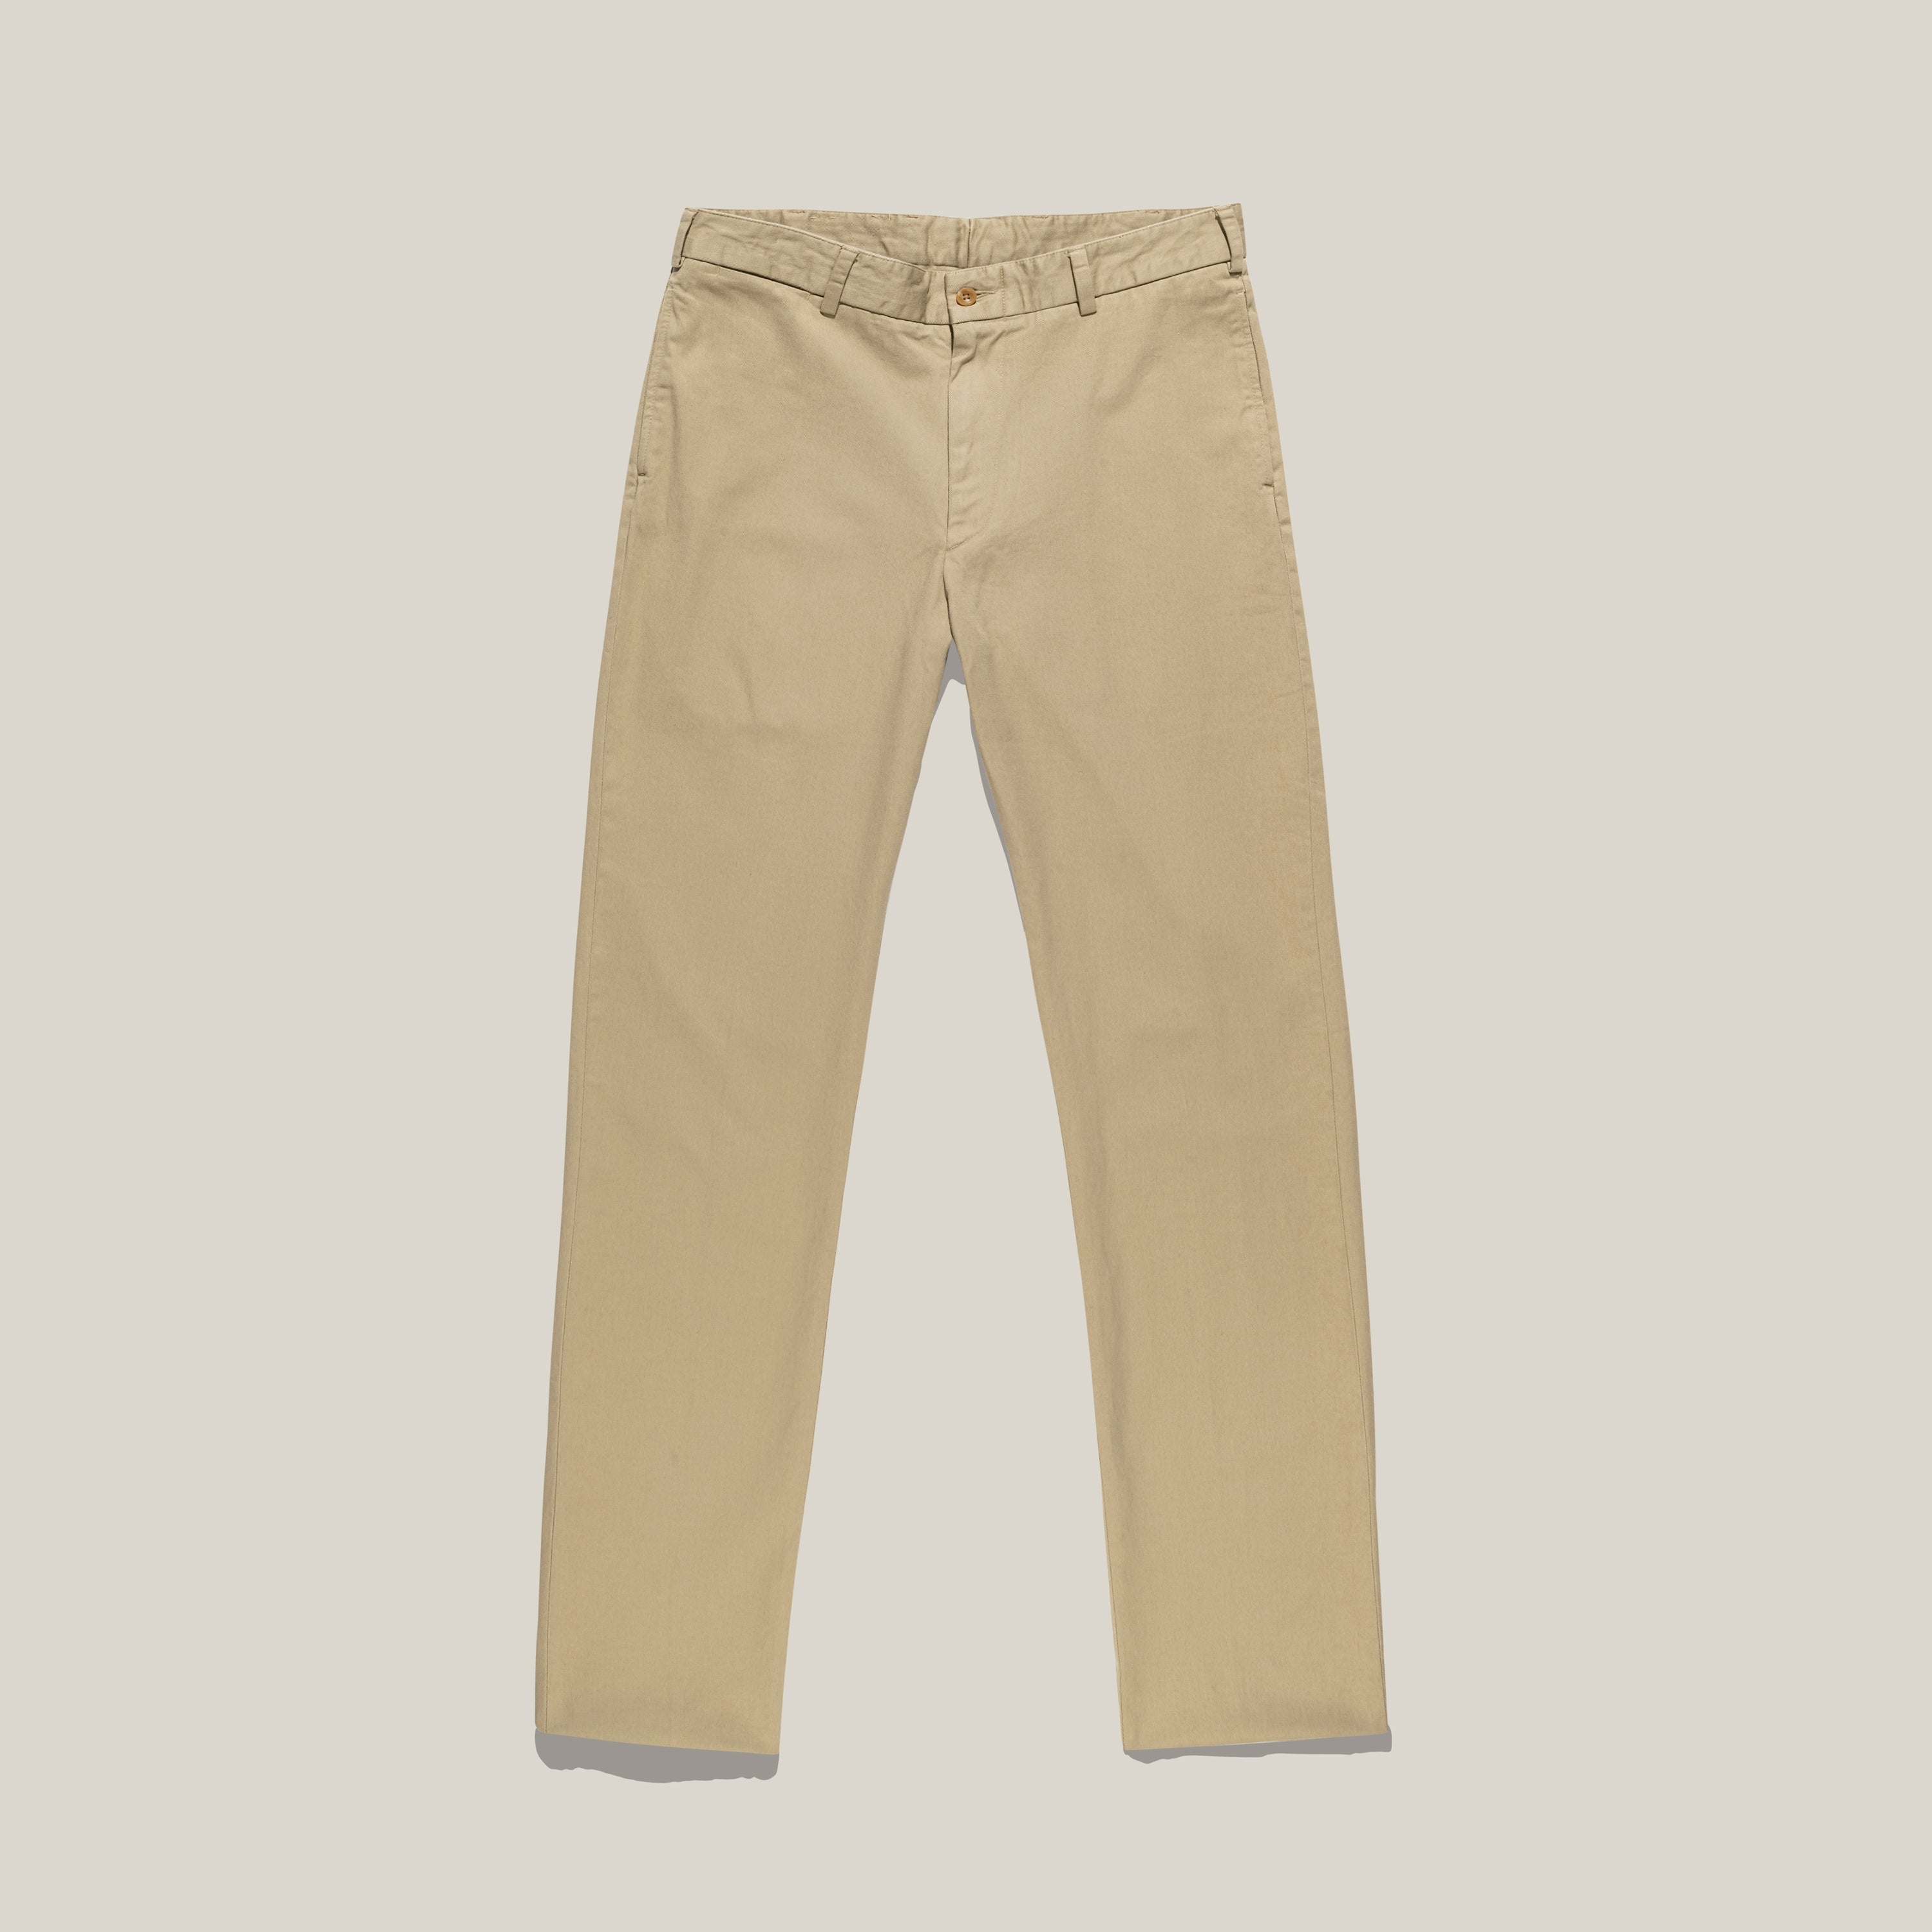 M1 - Relaxed Fit - Original Twill